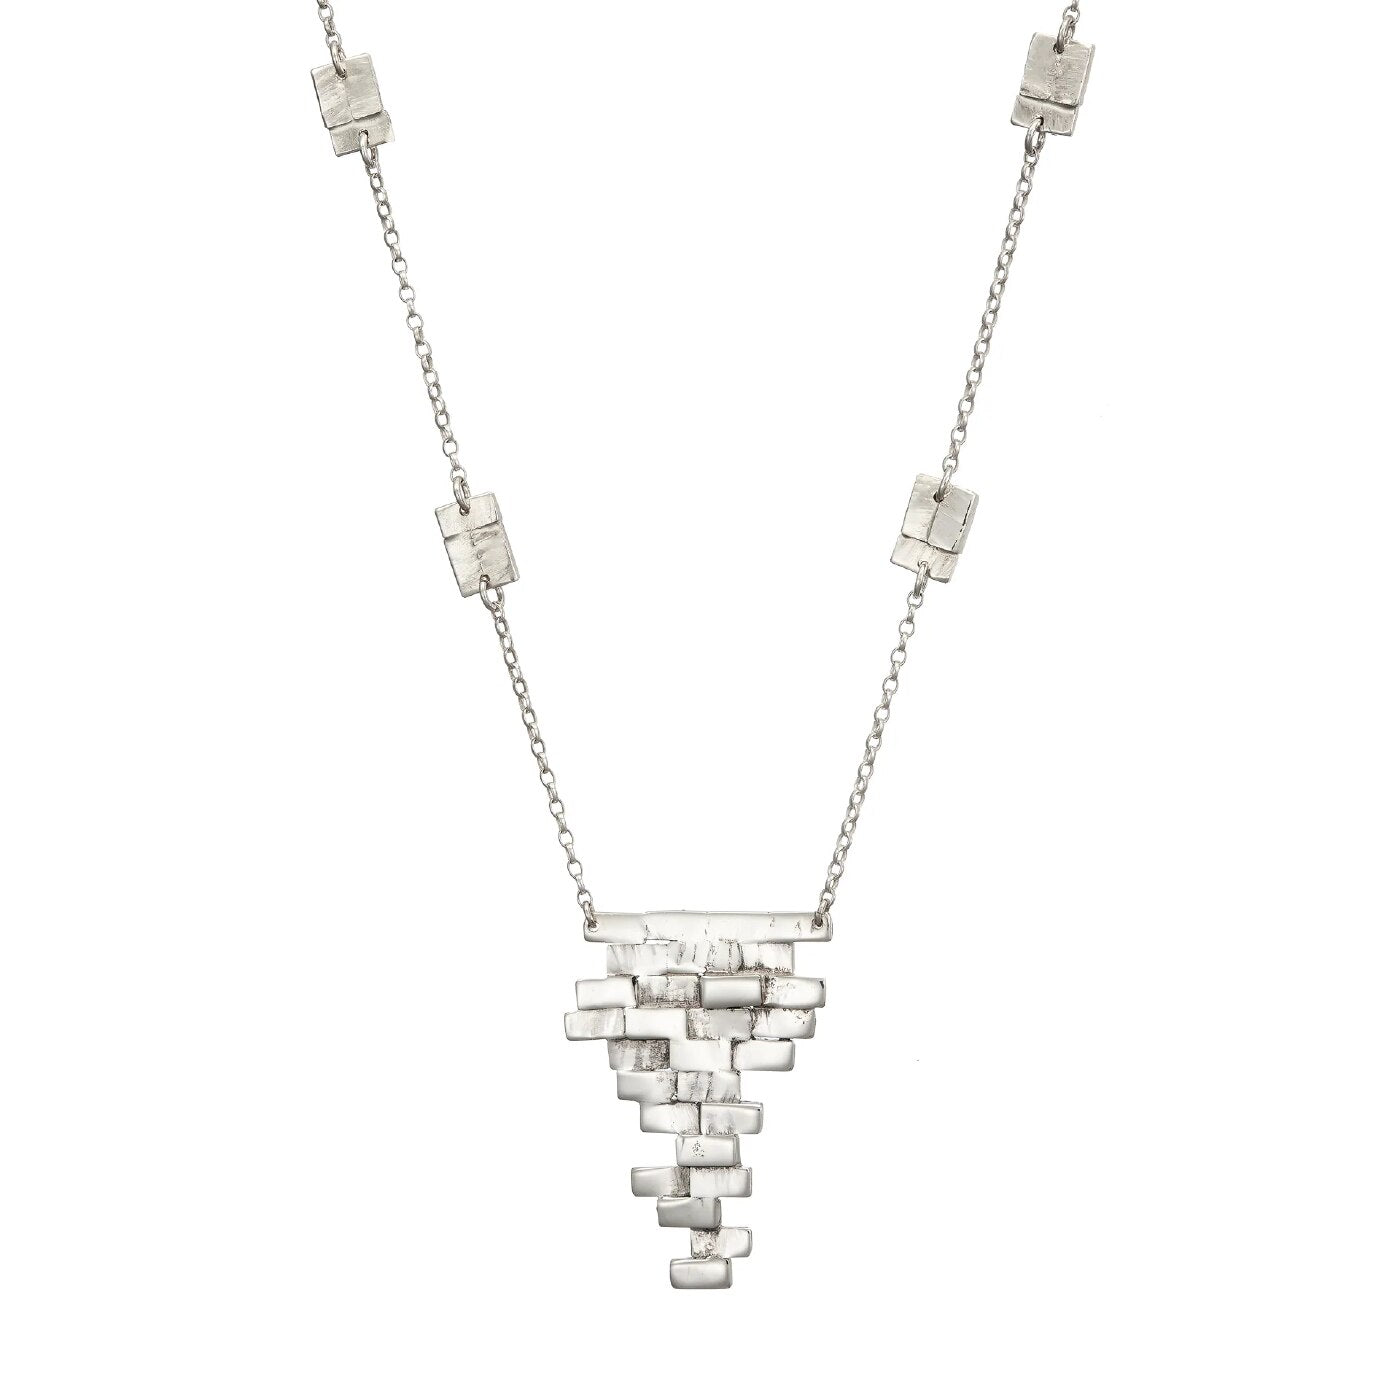 Clochán Giant's Causeway Necklace